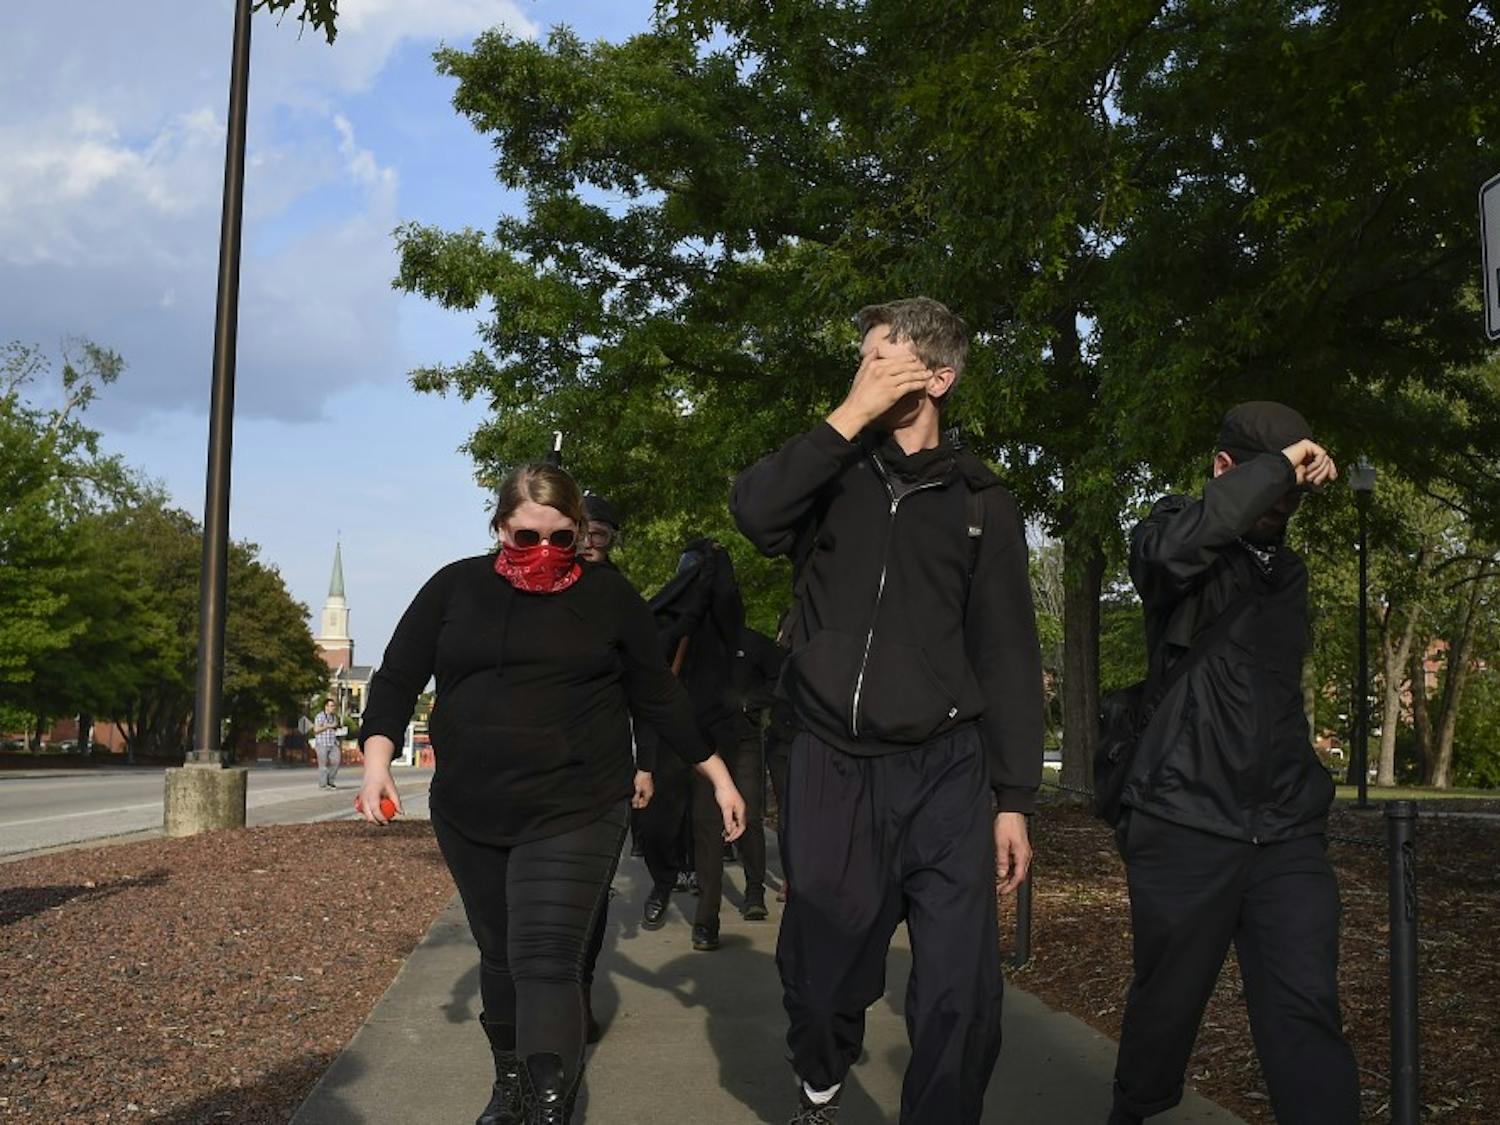 Members of an anti-fascist movement shield their faces after being asked to remove their masks by police, while walking toward Foy Hall on Tuesday, April 18, 2017 in Auburn, Ala. 